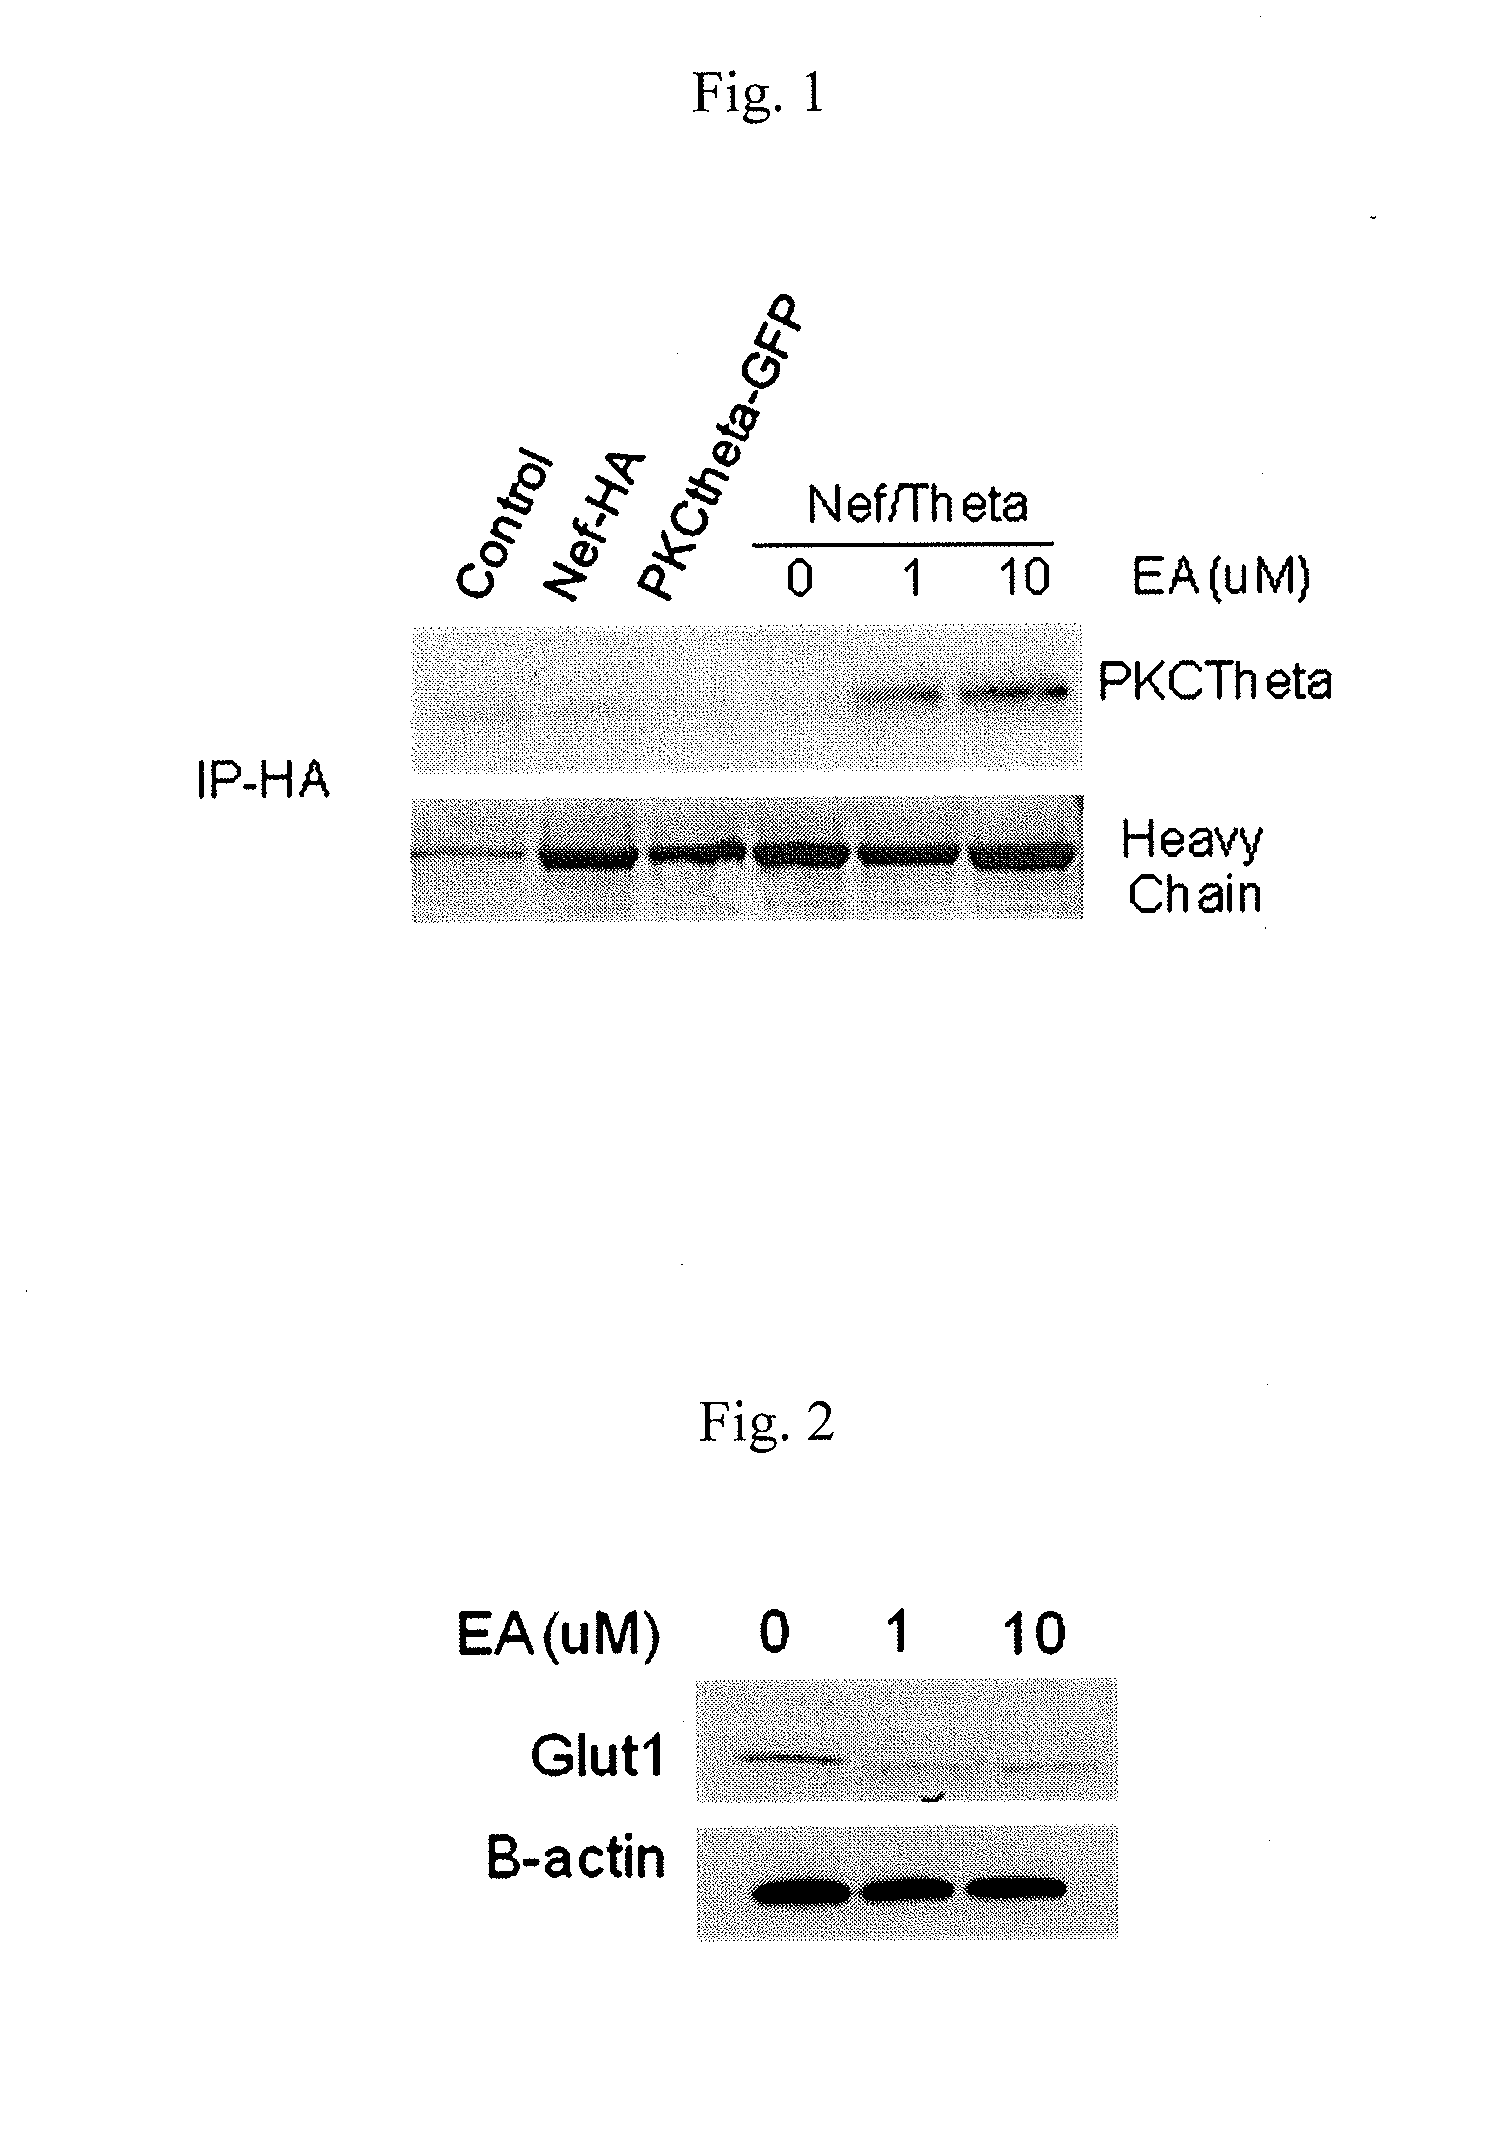 Methods of treating patients infected with HIV and htlv